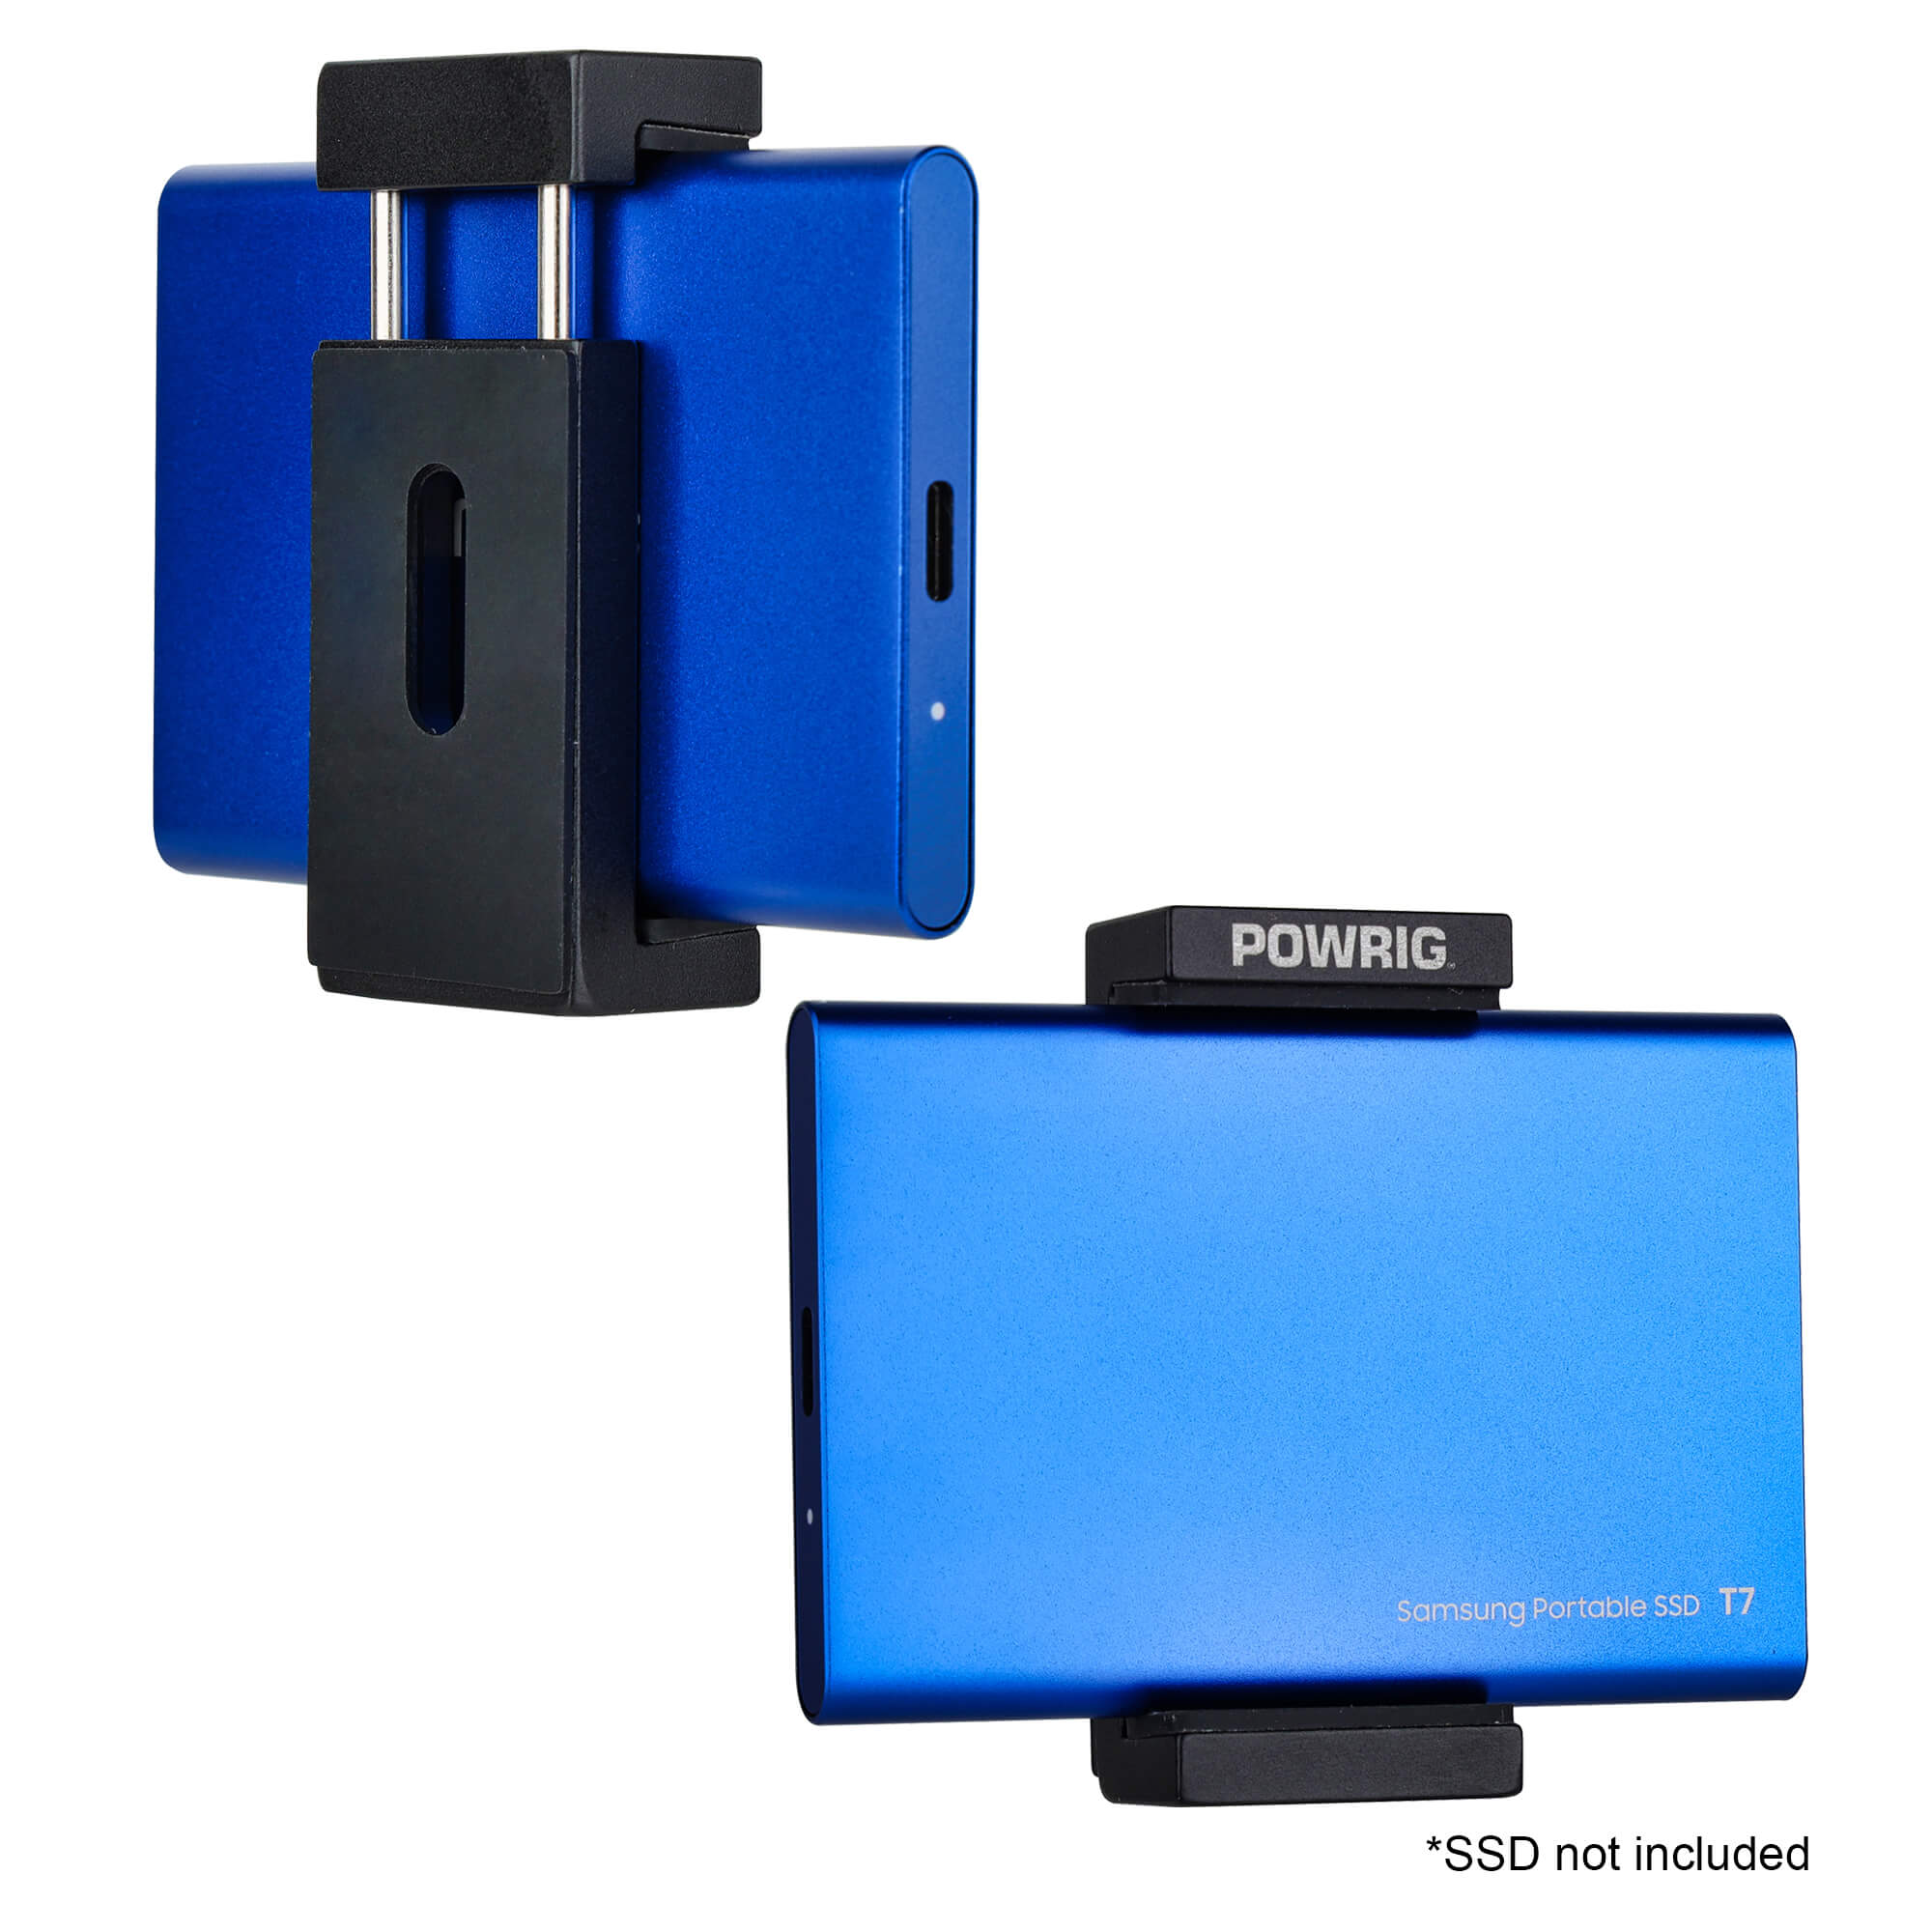 External SSD Holder Mount for Samsung T5/T7/T9, Sandisk Extreme Compat –  Photo & Video Gears